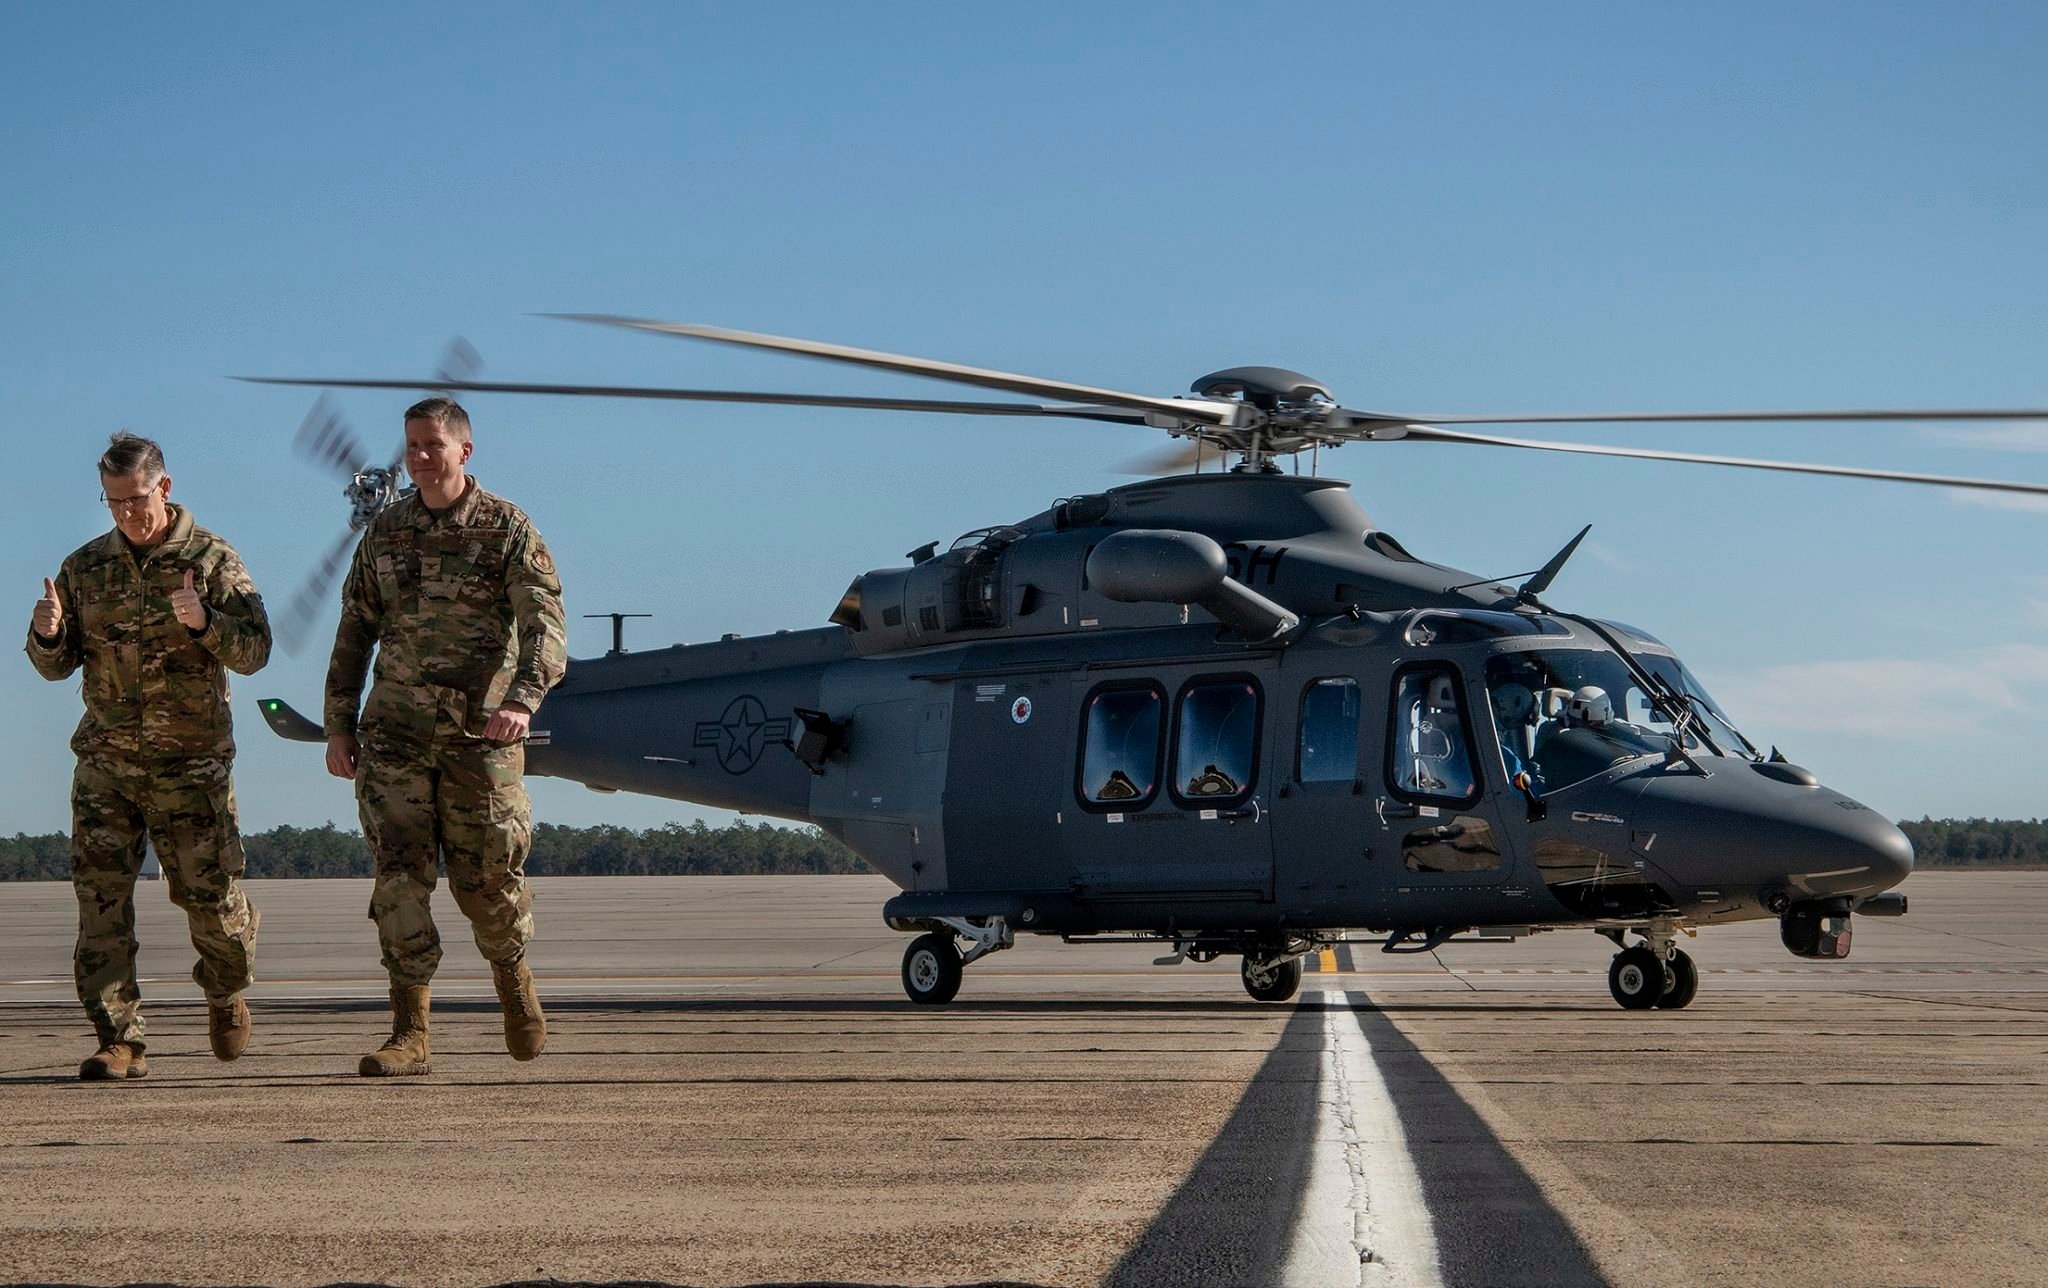 MH-139 Grey Wolf multi-mission helicopter will join the U.S. Air Force